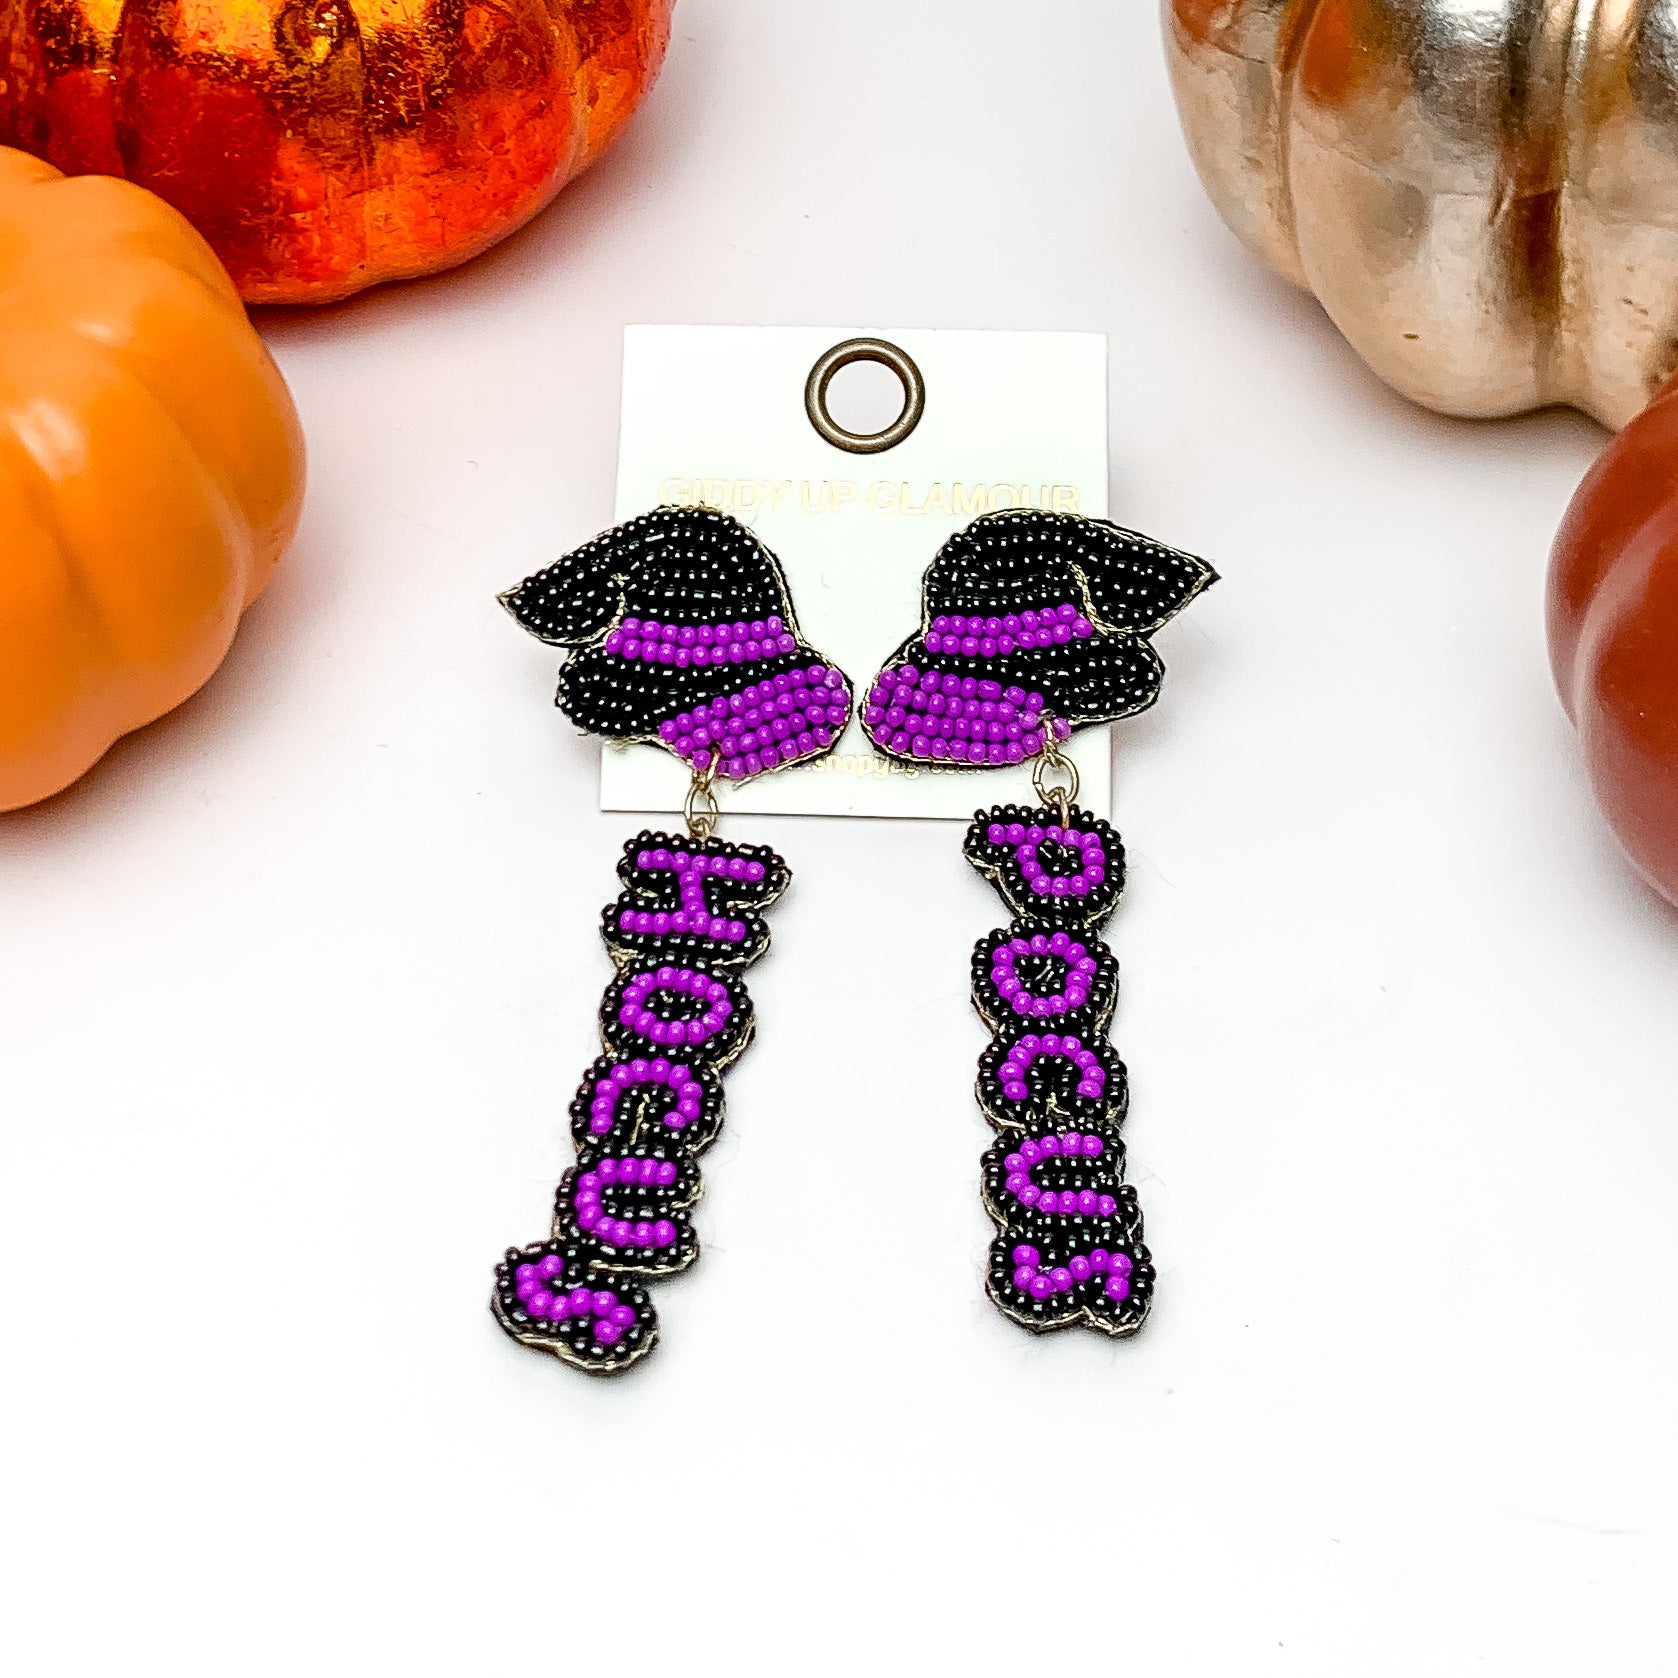 Hocus Pocus Beaded Earrings in Black and Purple. These earrings are on a white background with orange and silver pumpkins around them.